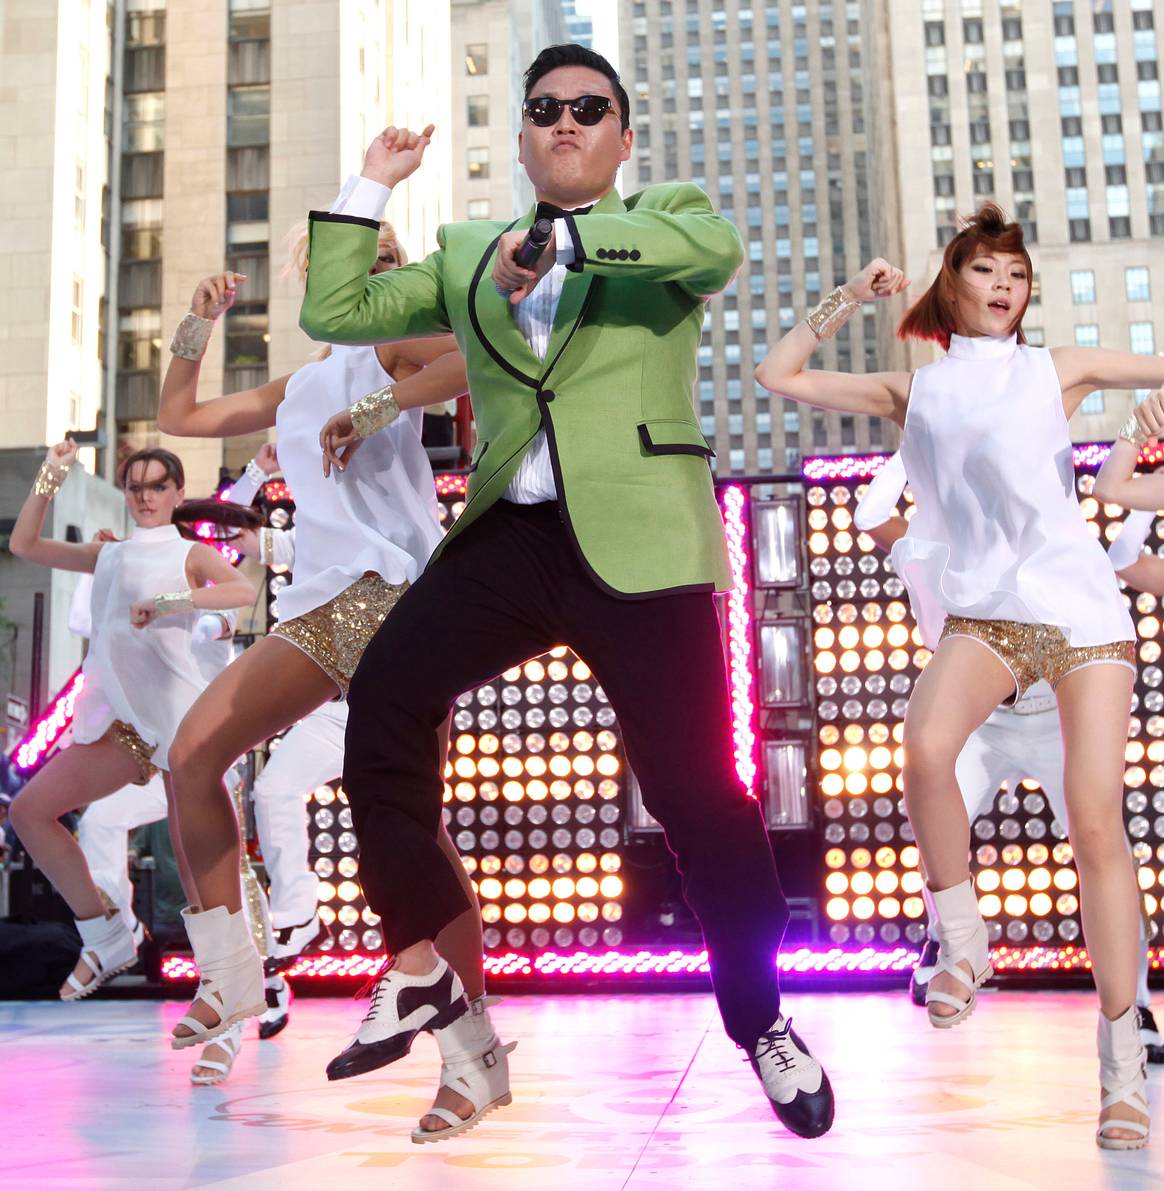 Image: V&A; PSY performs Gangnam Style, on Today, 2012, New York, USA. Courtesy of Jason Decrow, Invision, AP, Shutterstock